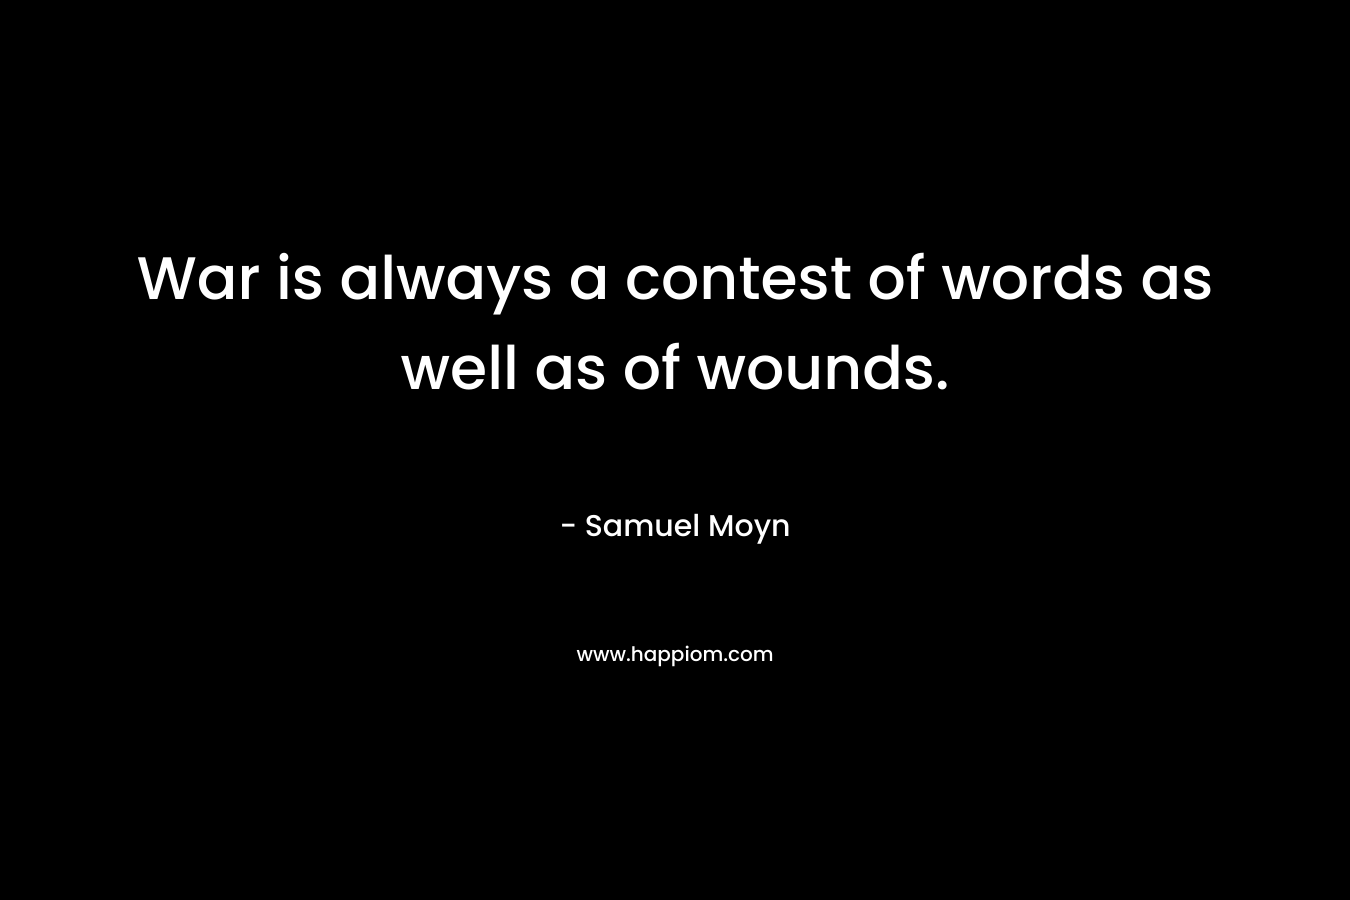 War is always a contest of words as well as of wounds.